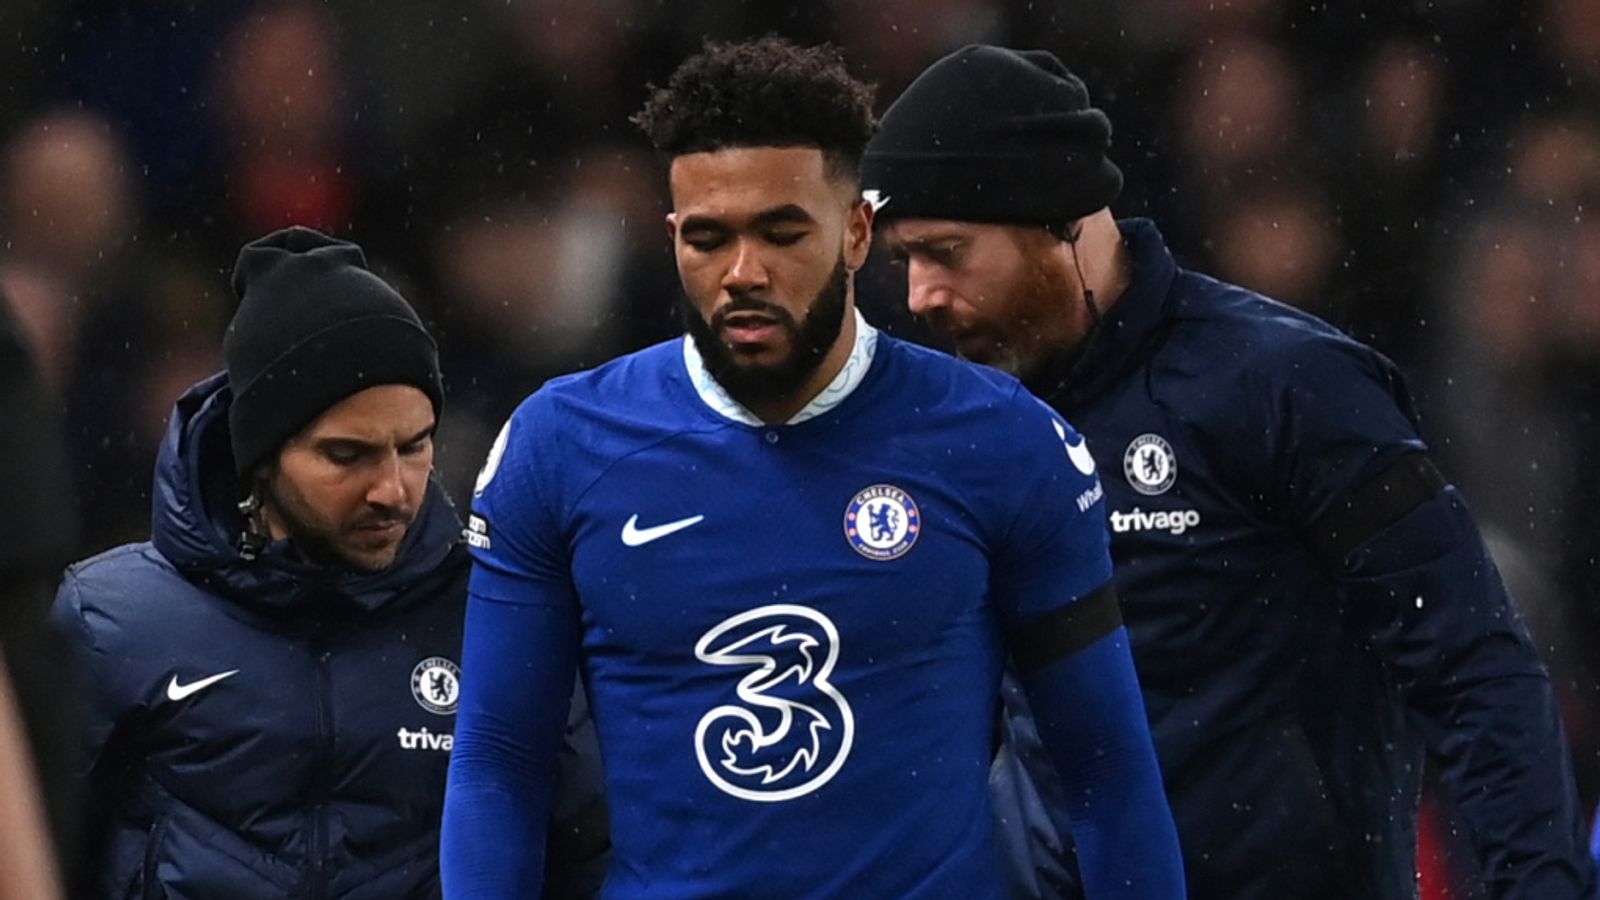 Reece James: Chelsea confirm defender is out for up to a month after knee injury against Bournemouth